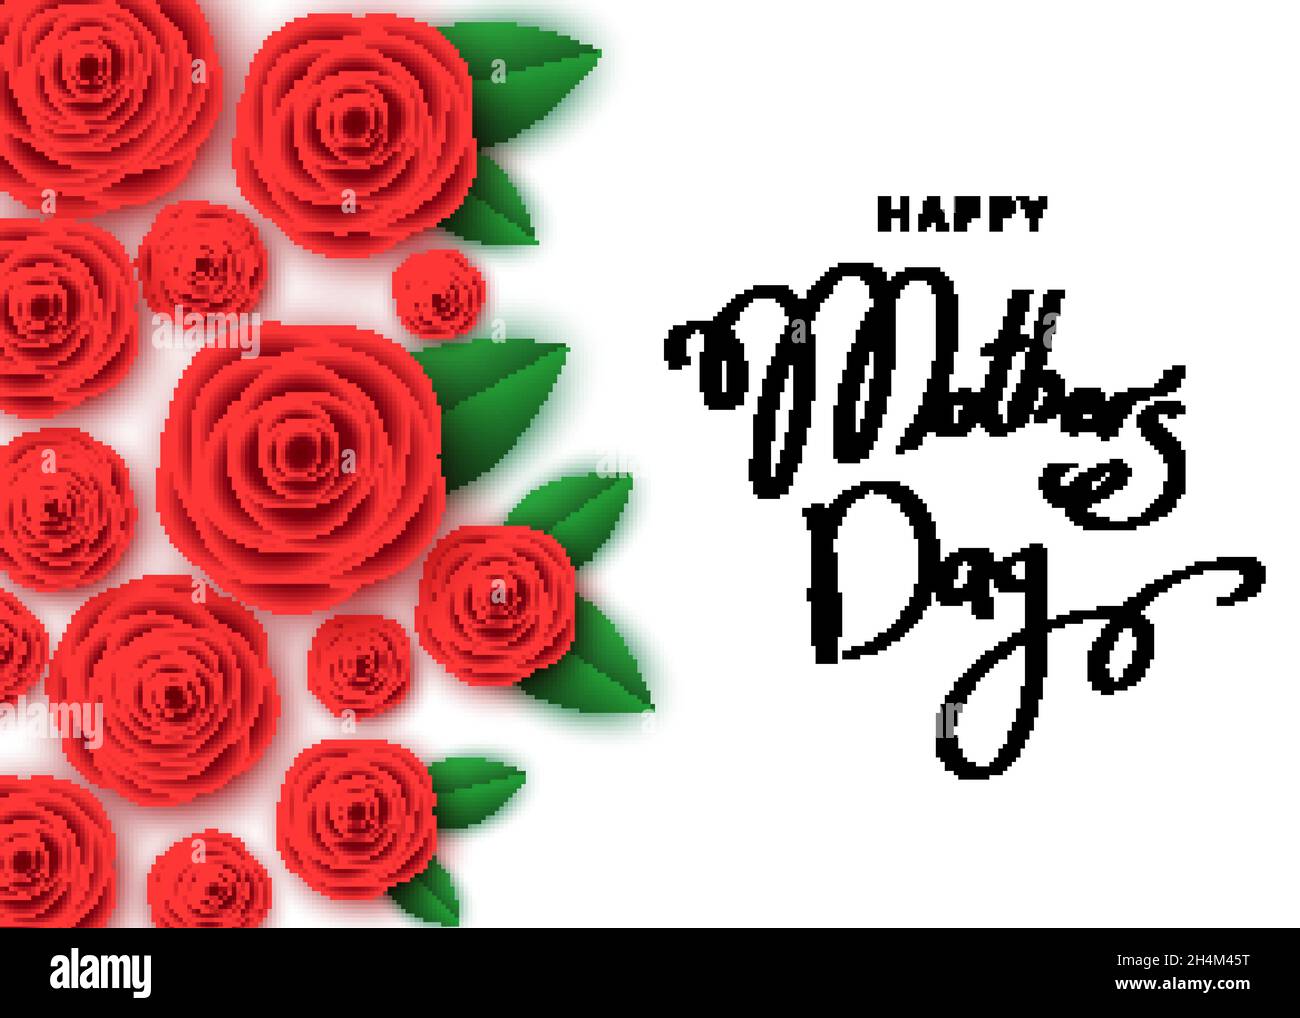 Happy mother's day banner template with red roses, hand-drawn ...